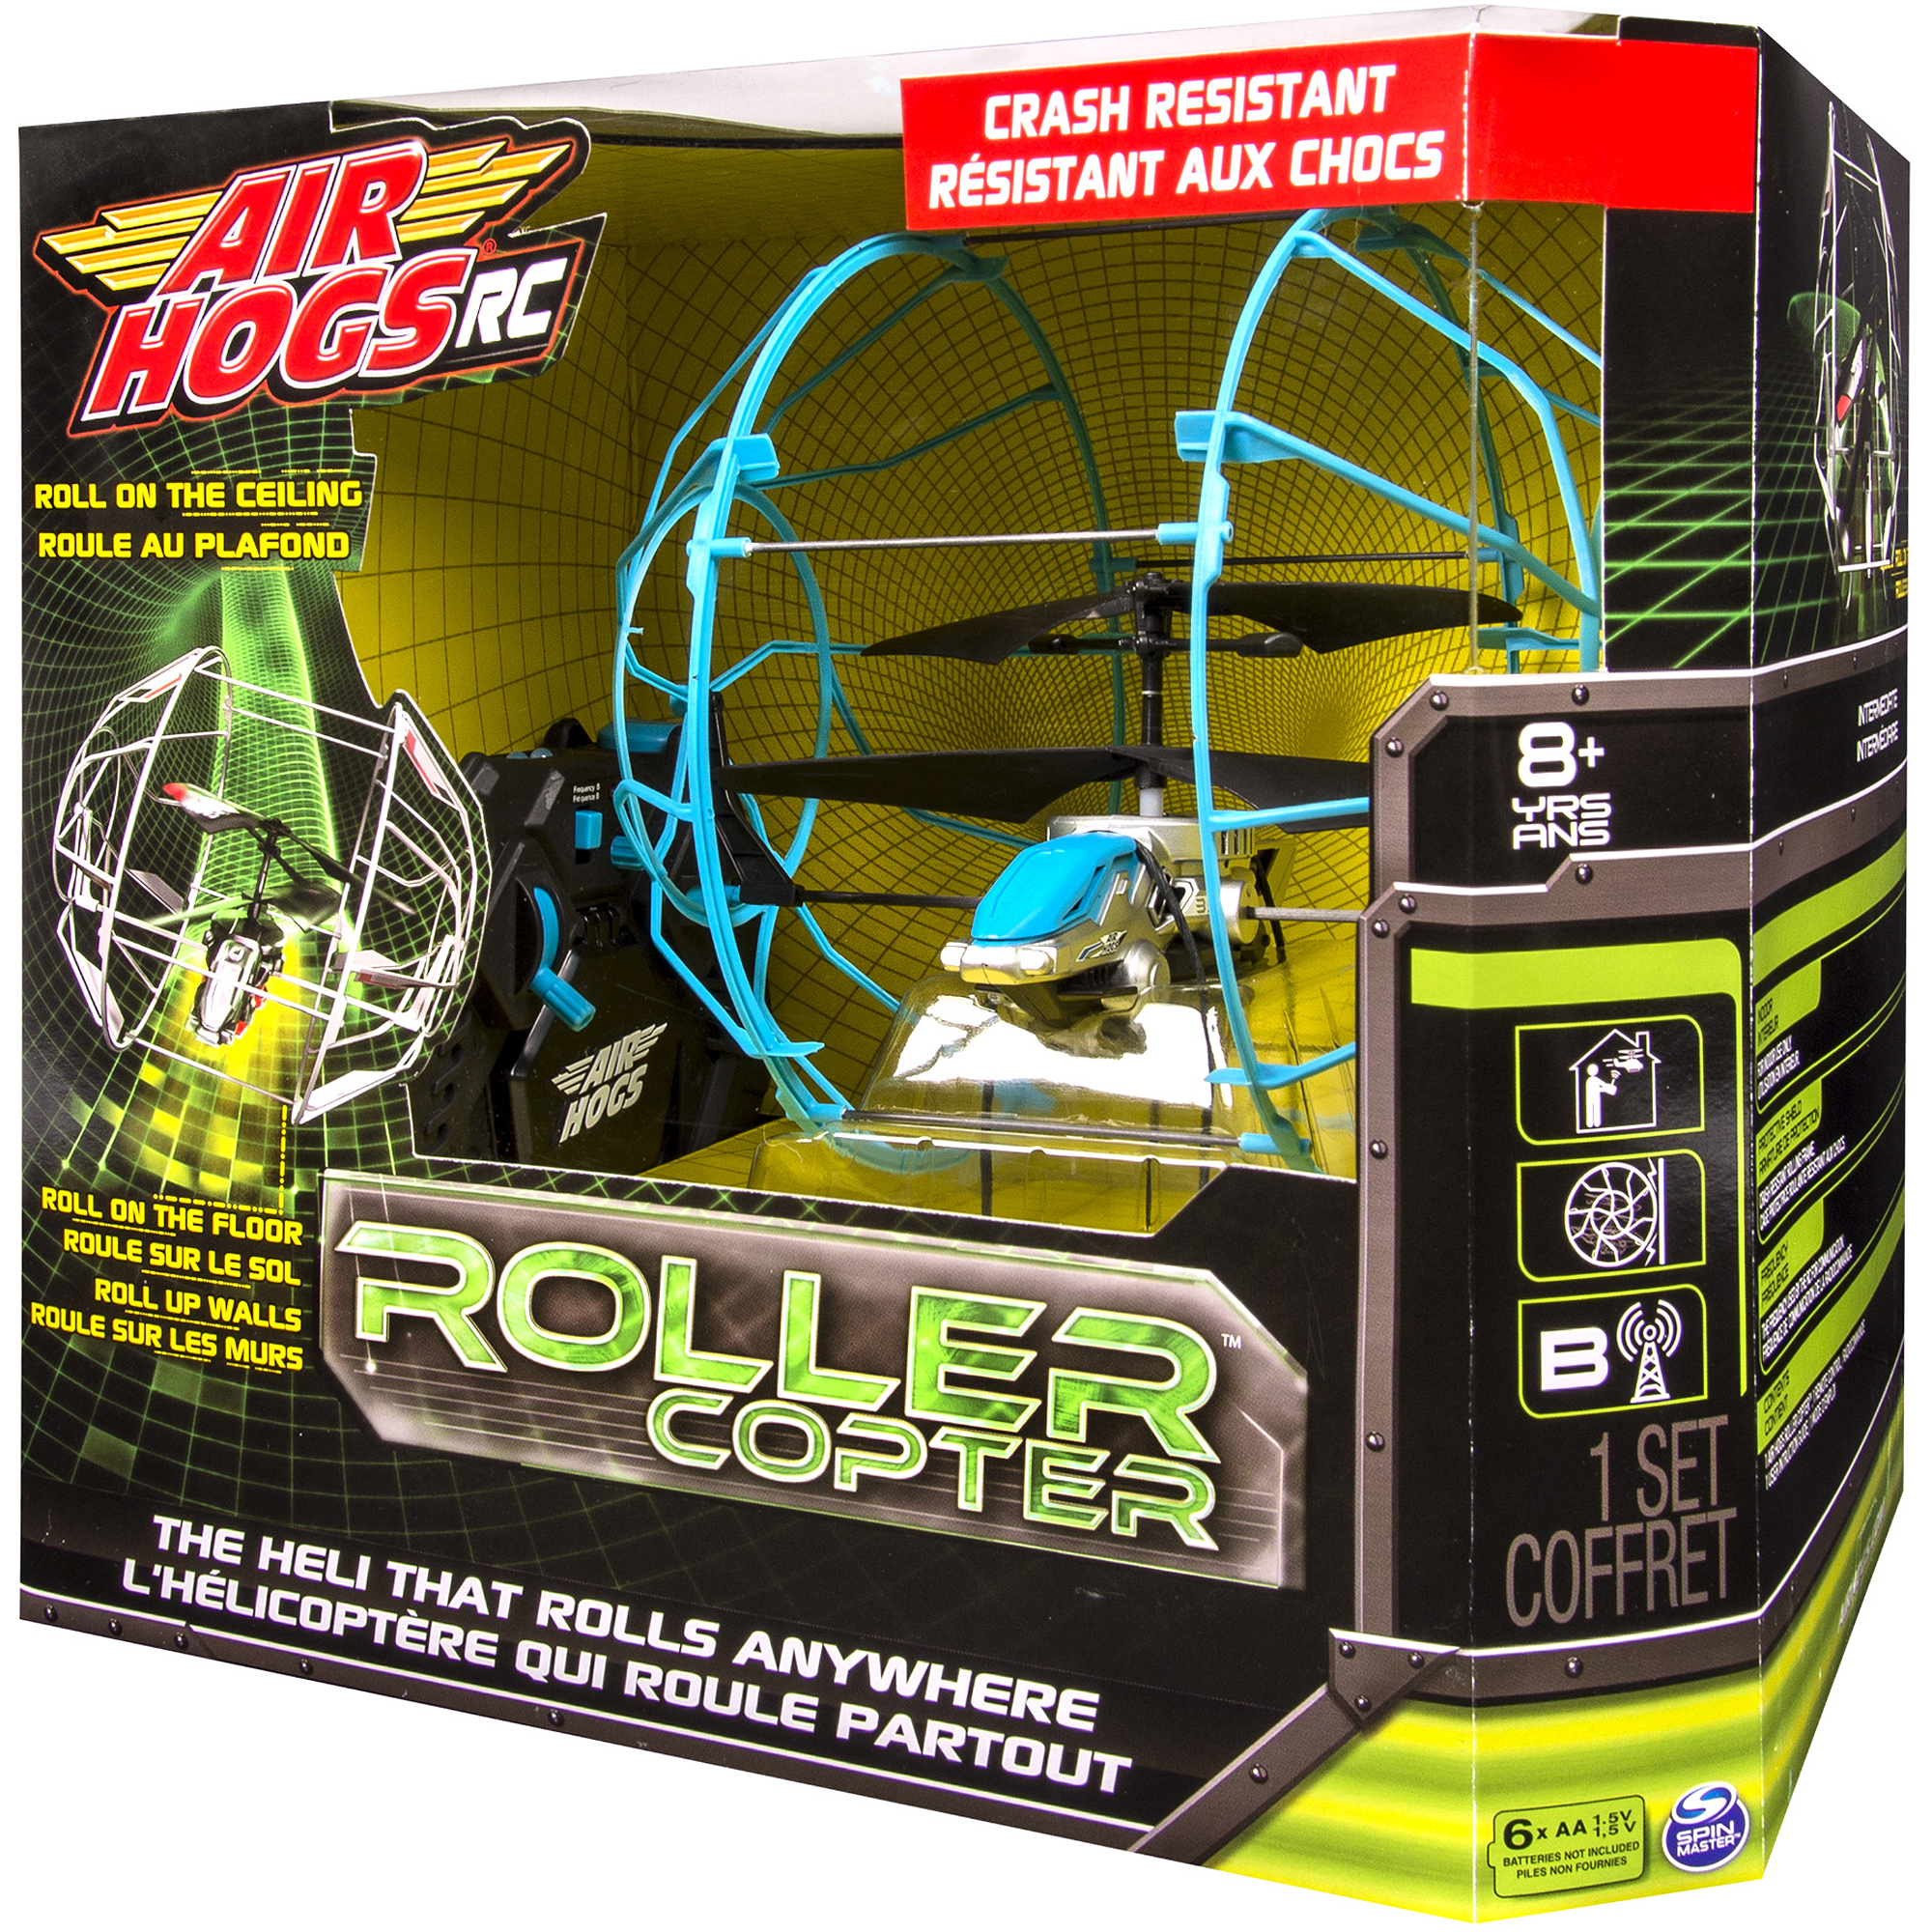 Air Hogs RC Rollercopter, in color Red or Blue - image 5 of 6